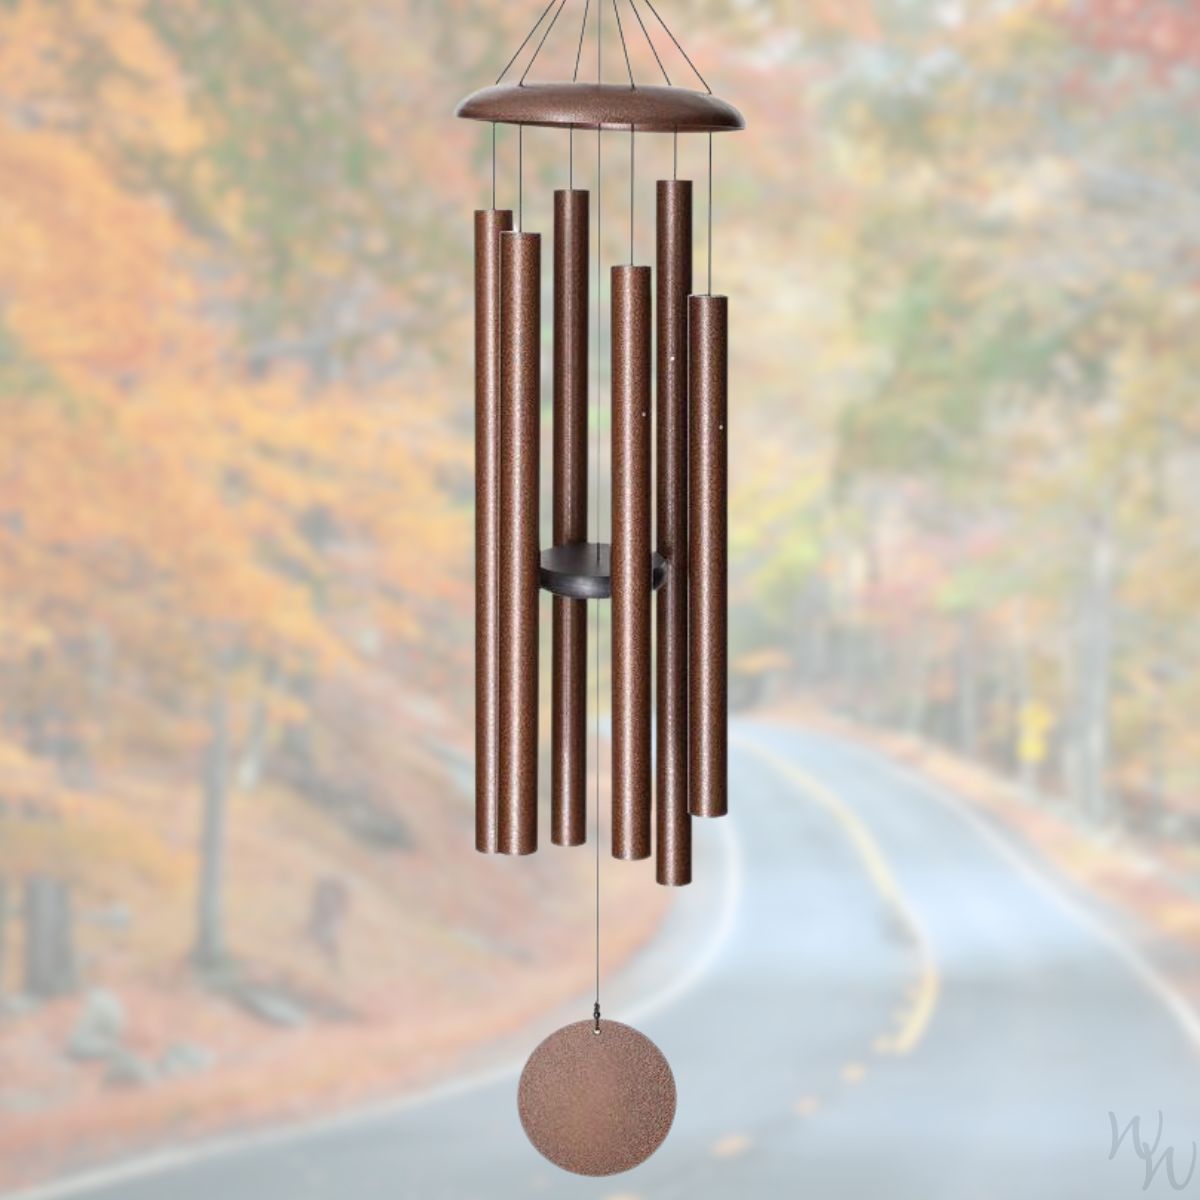 Corinthian Bells 56 Inch Copper Vein Wind Chime - Scale Of G